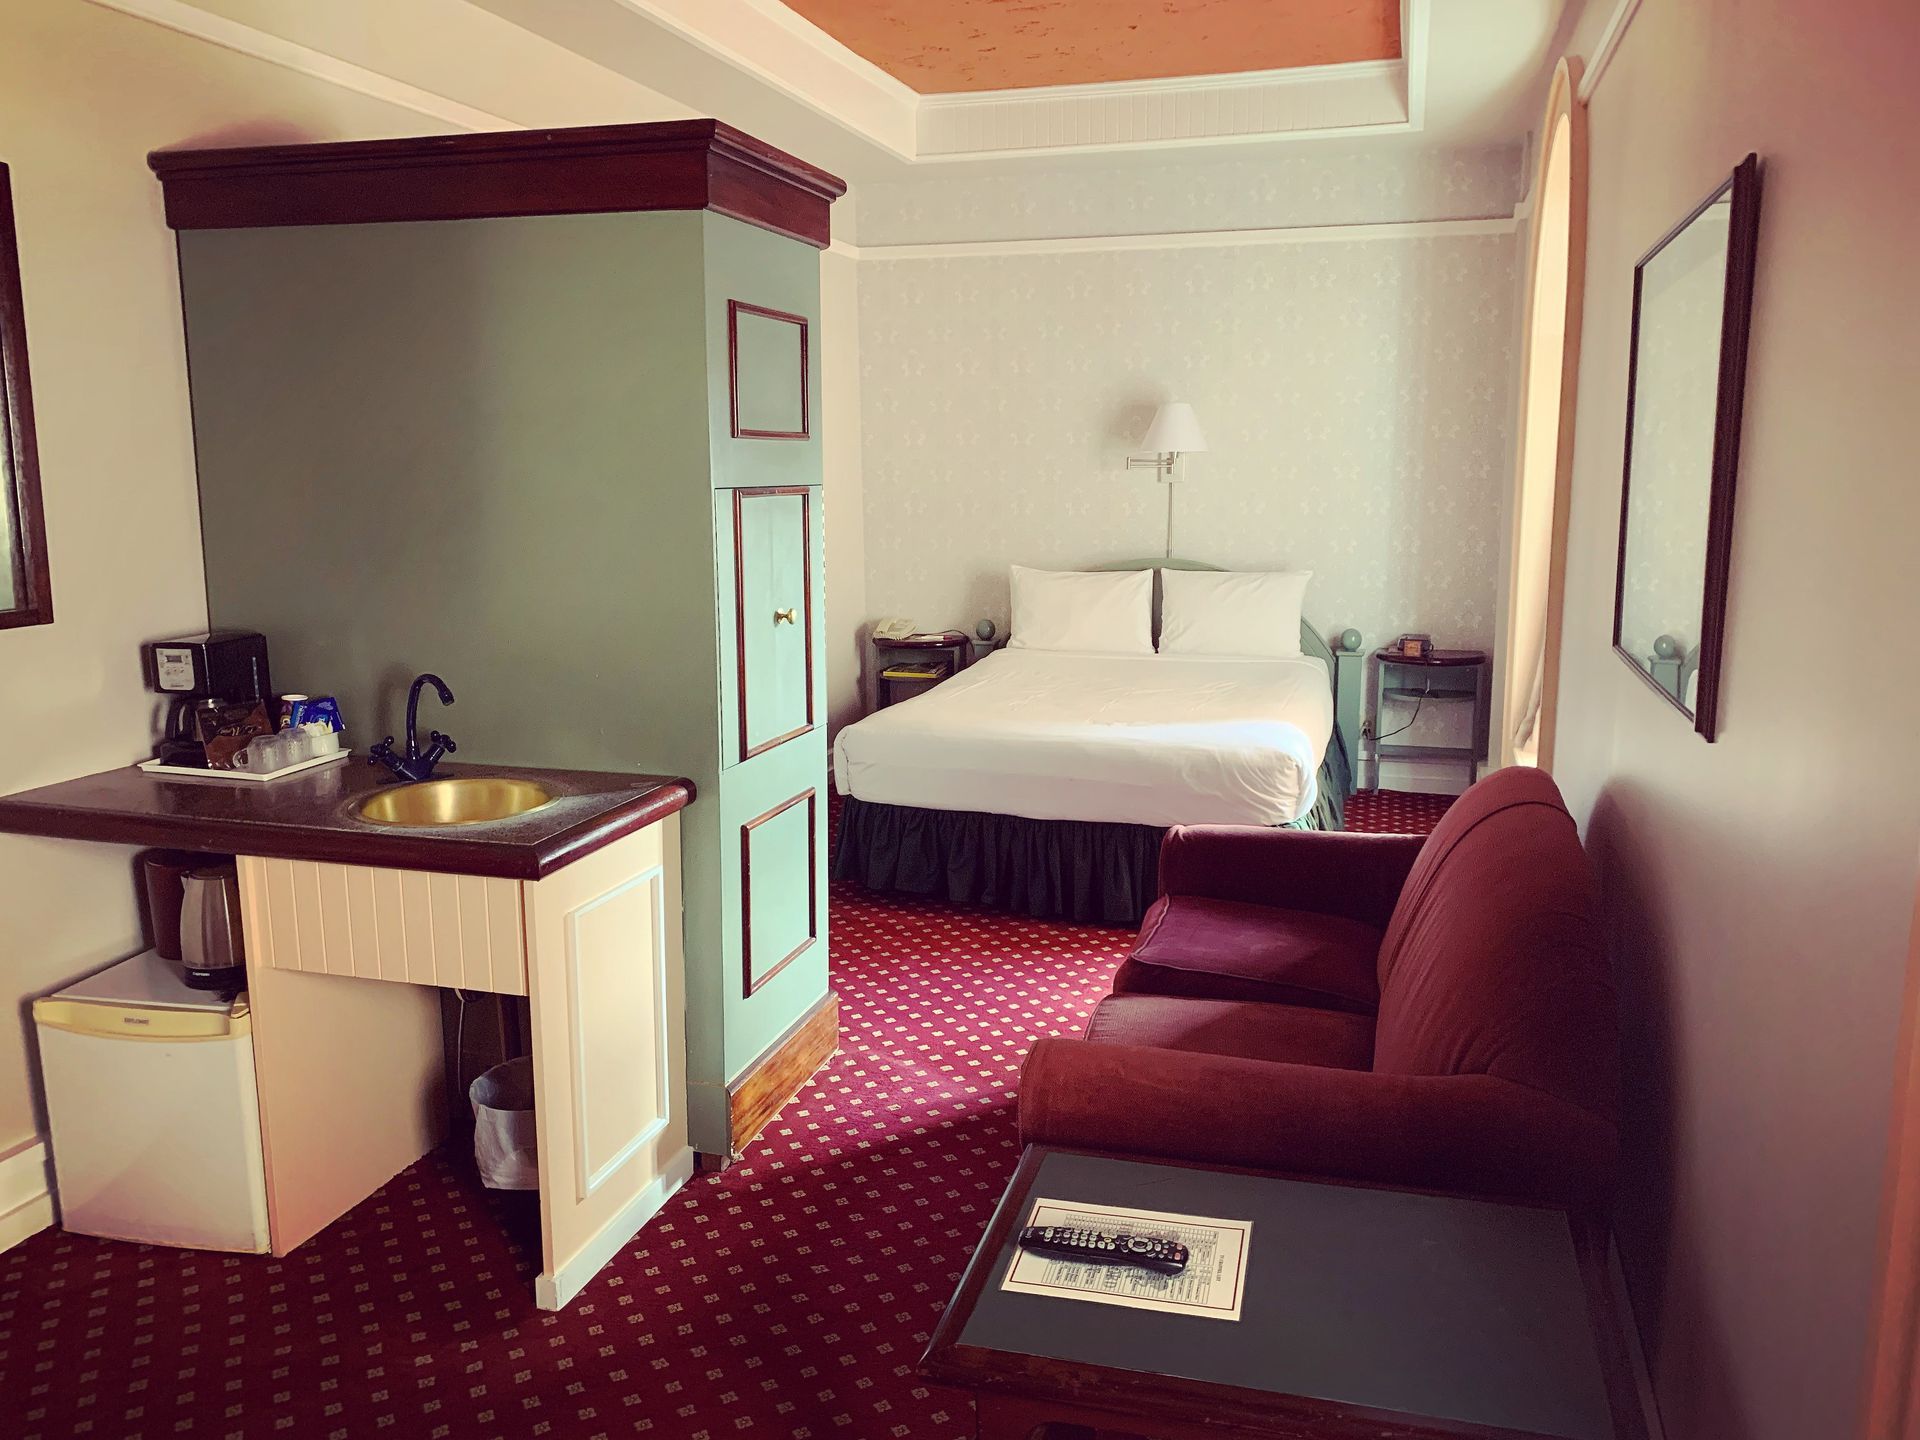 A hotel room with a bed , couch , table and sink.